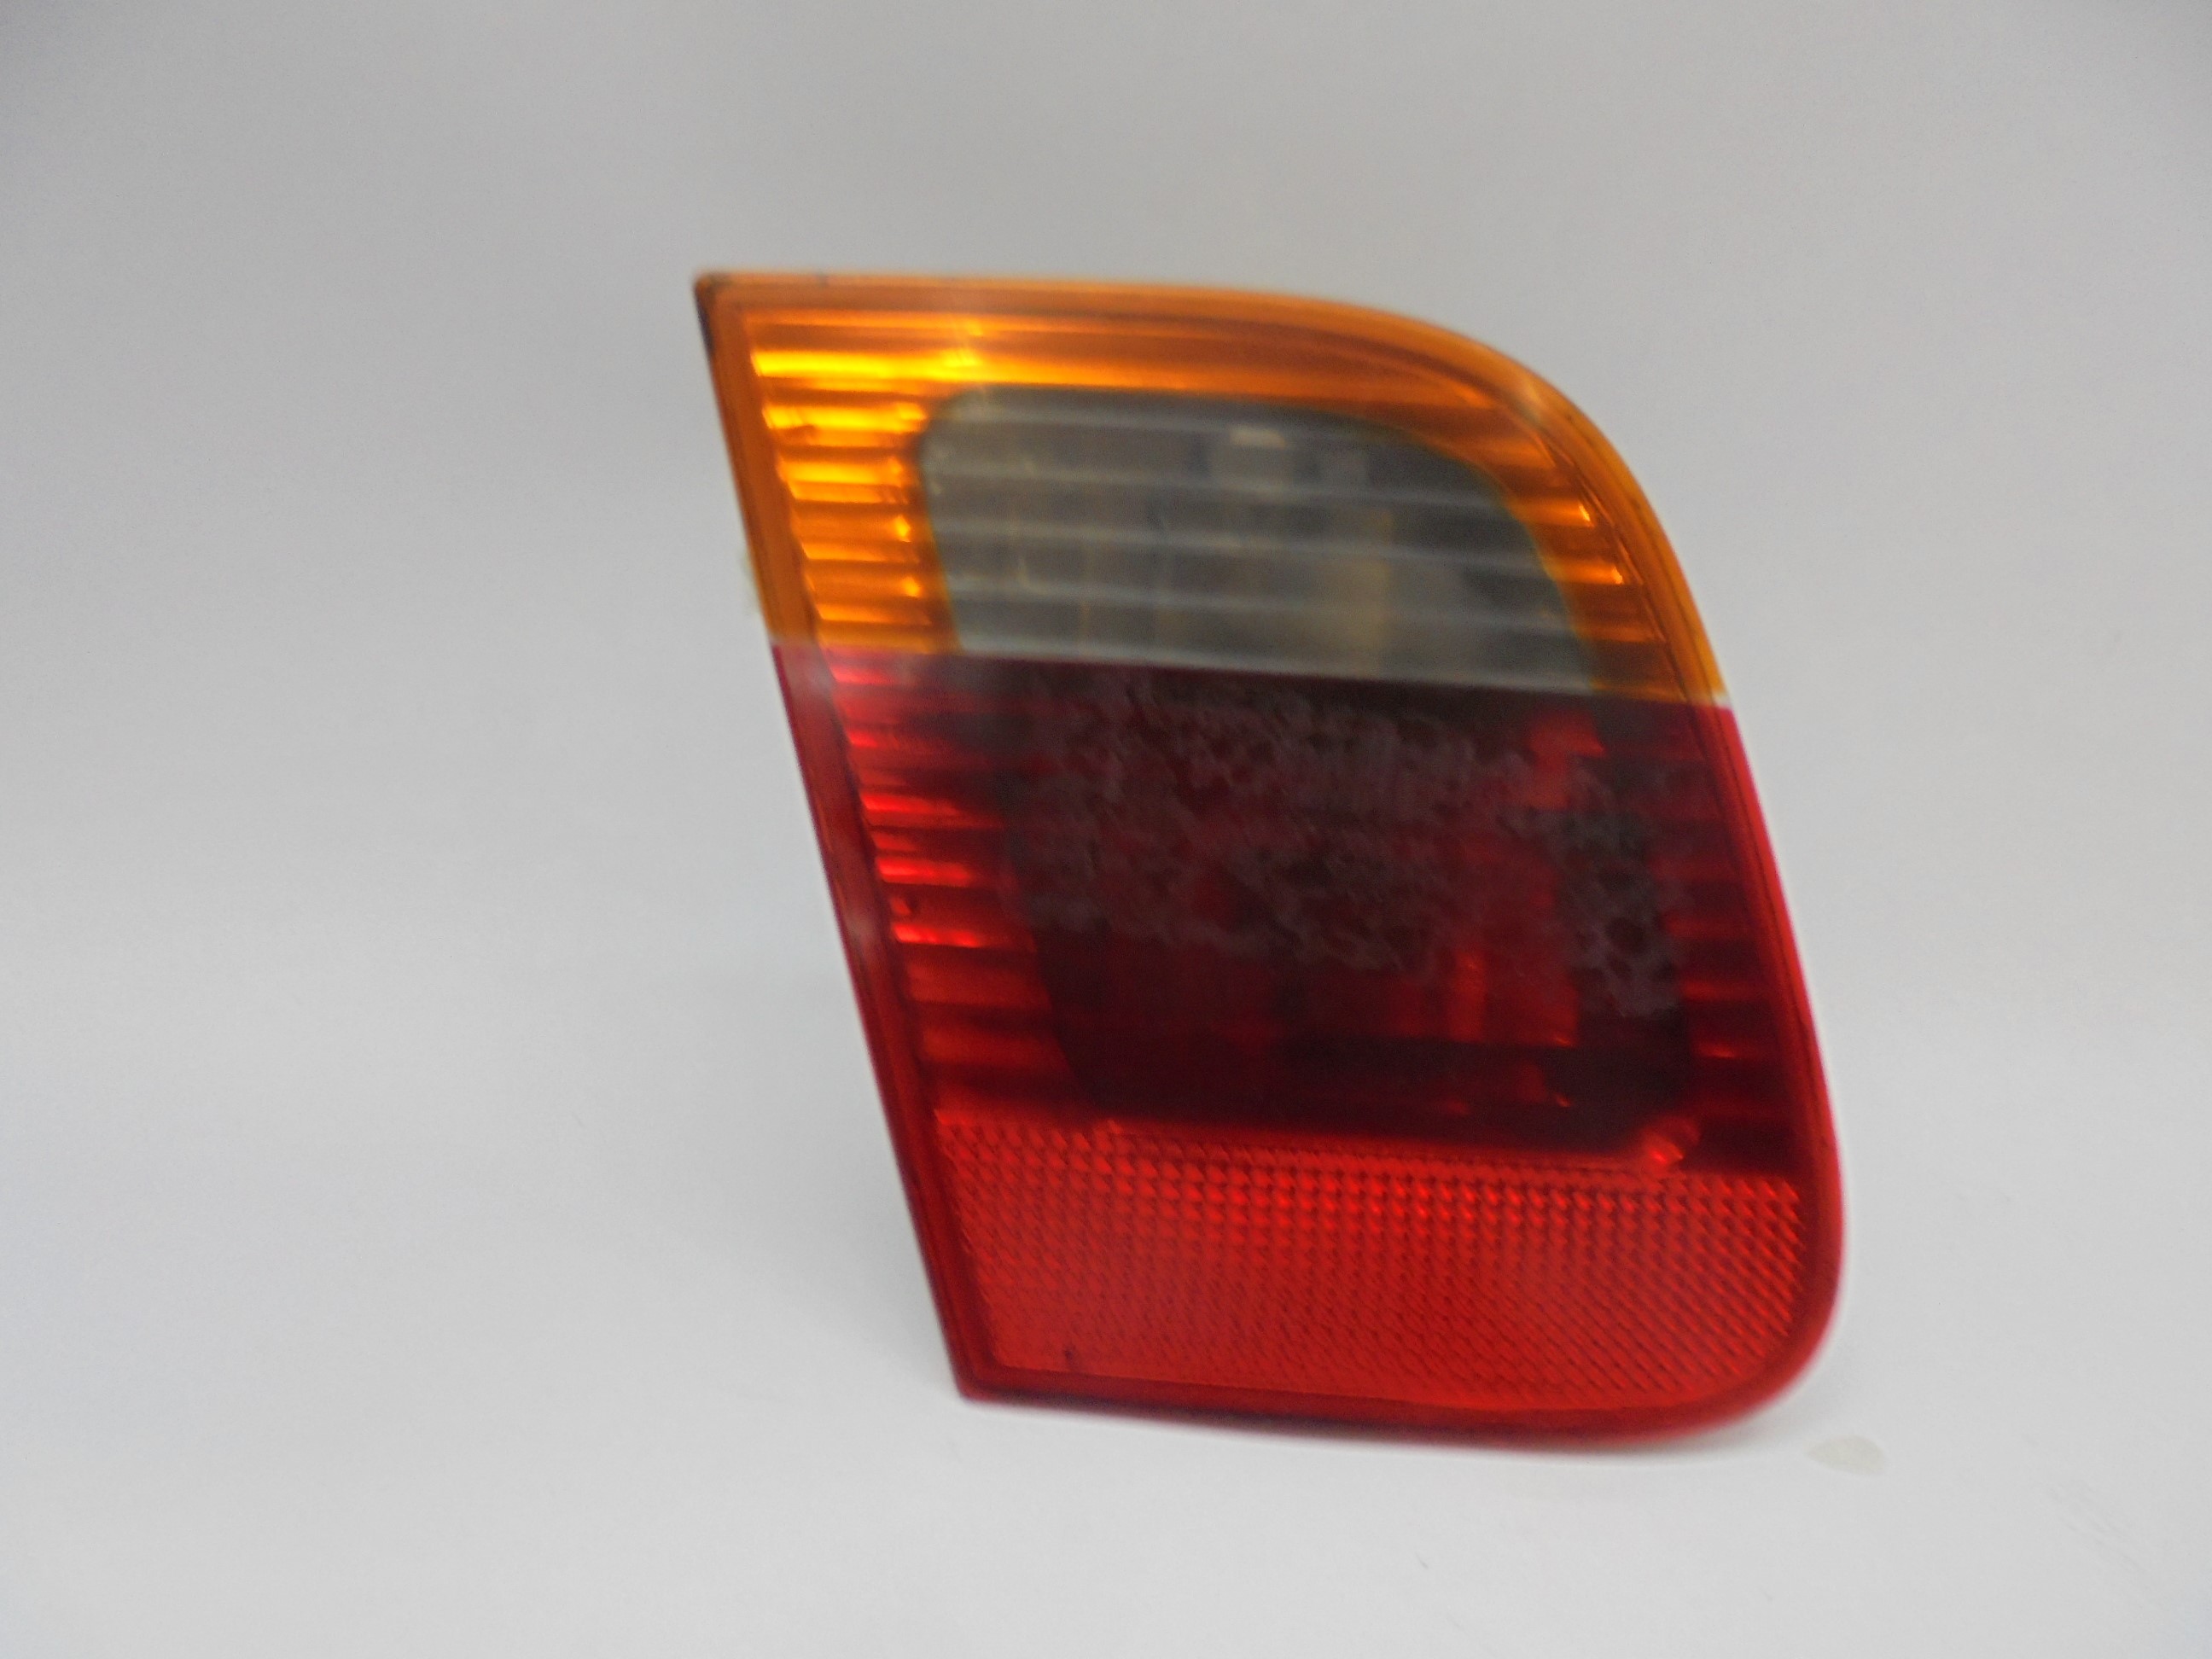 BMW 3 Series E46 (1997-2006) Rear Left Taillight 63216907945 25124142